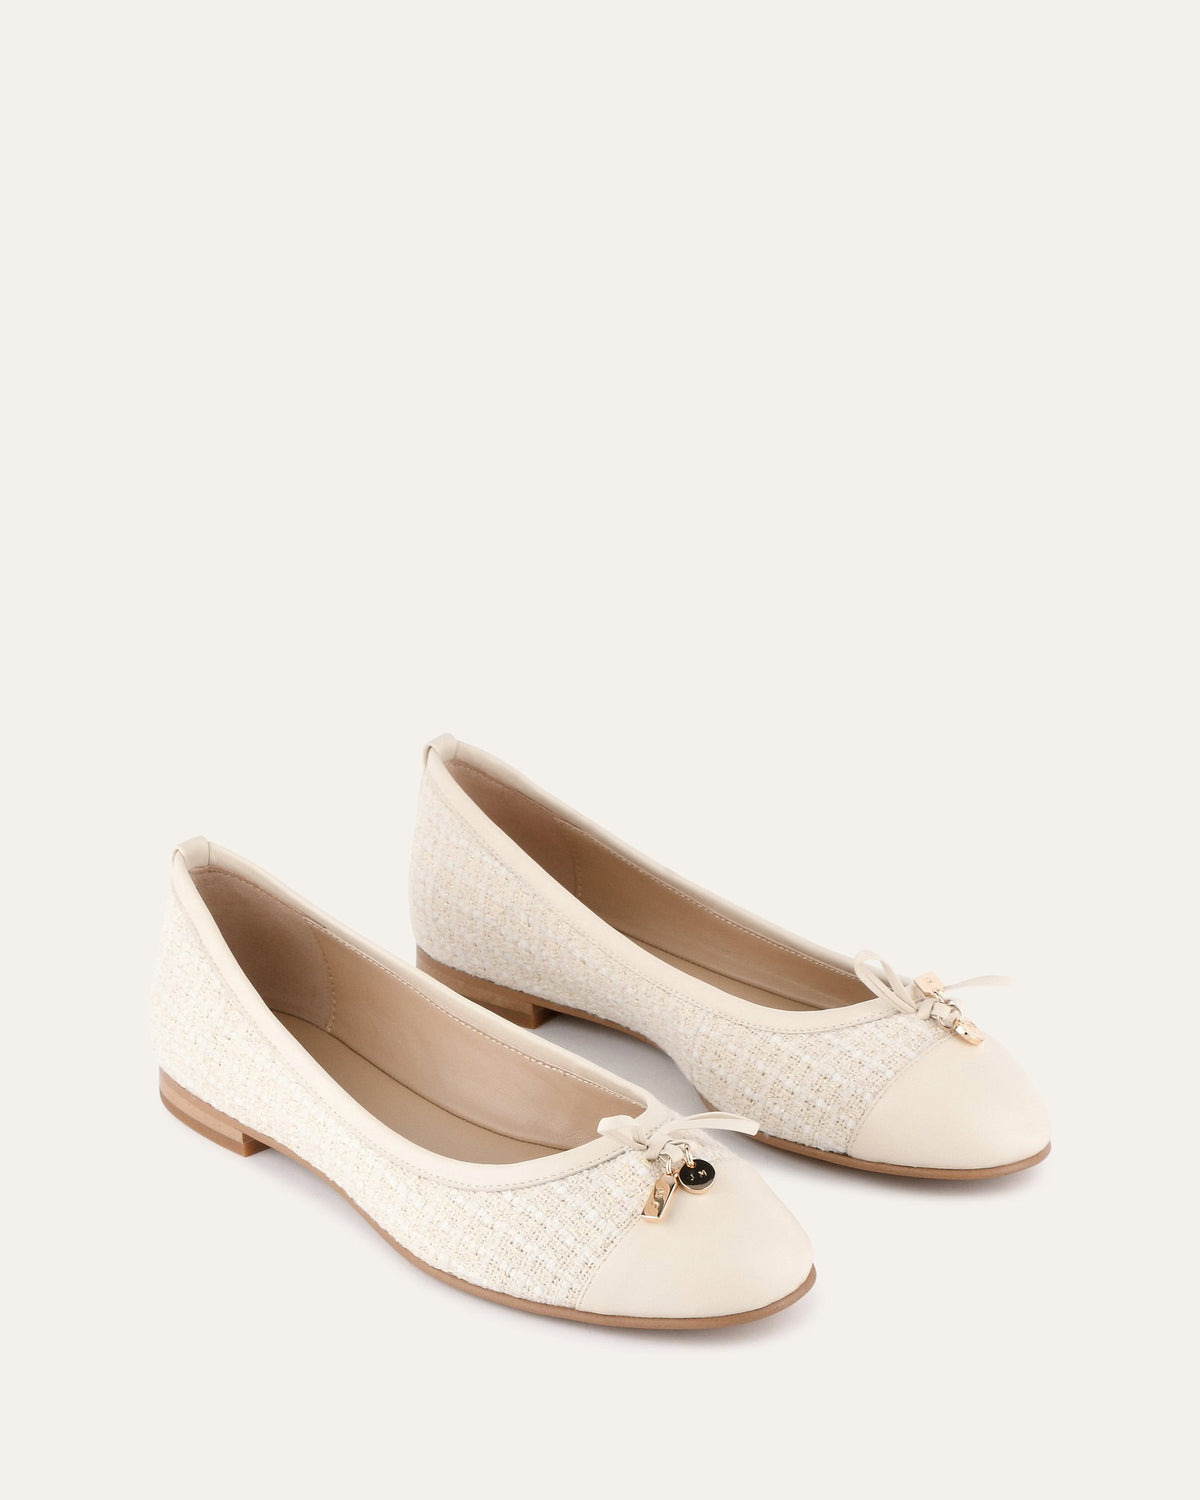 HERMIONE DRESS FLATS OFF WHITE WOVEN